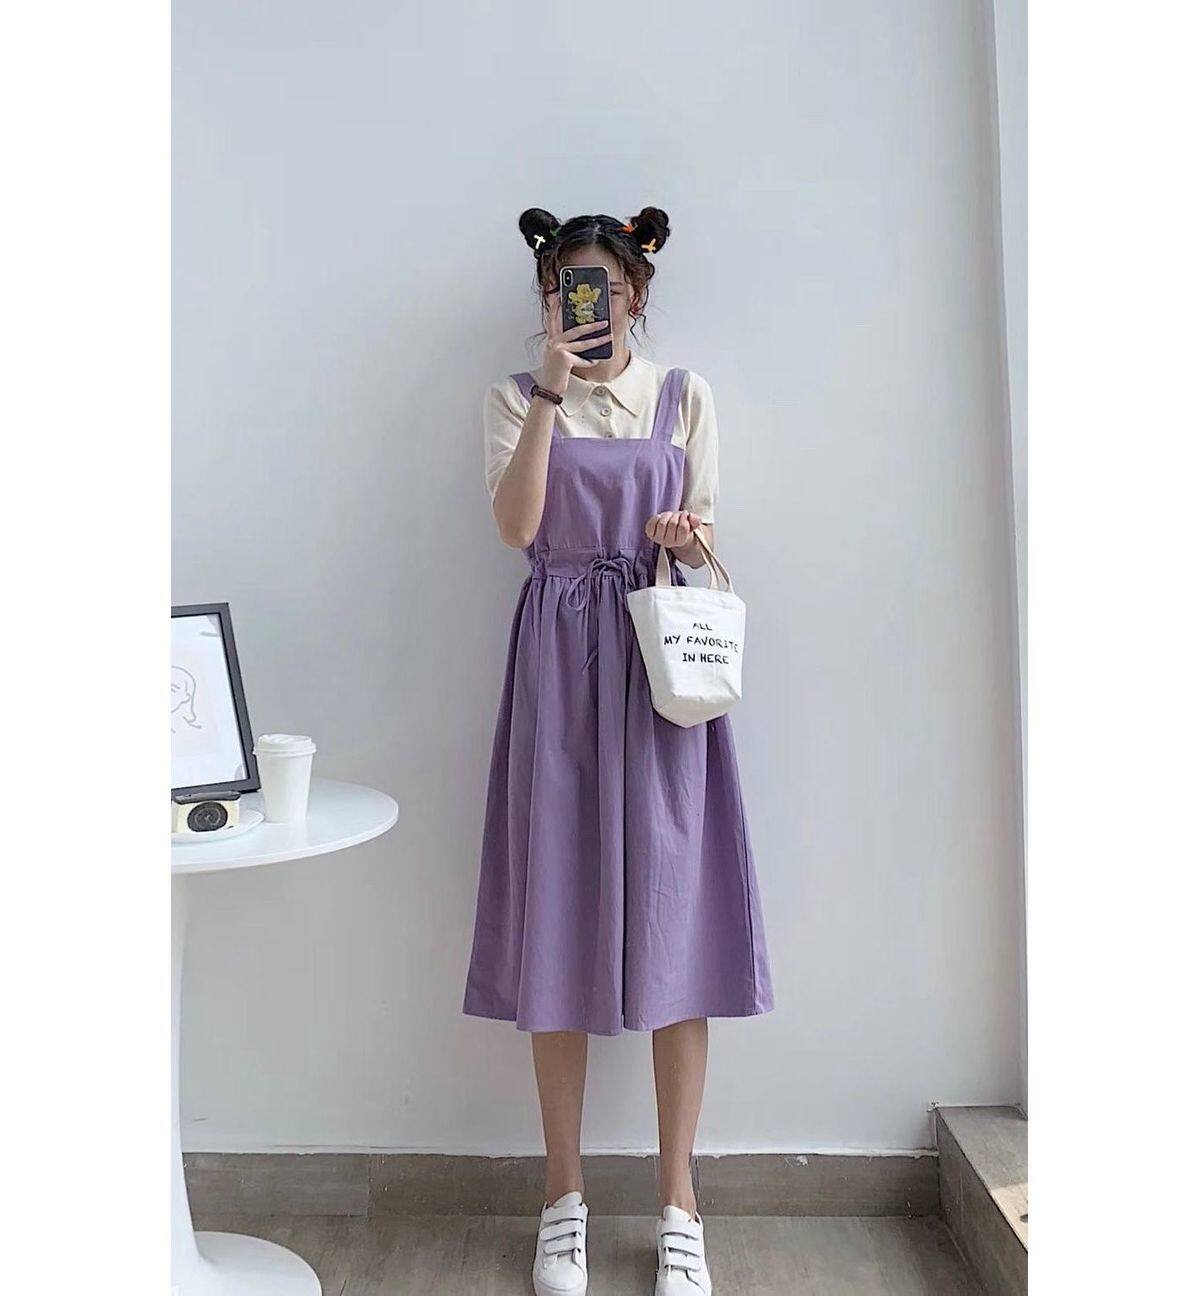 One-piece/suit summer new Korean style ins sweet purple suspender skirt + knitted T-shirt two-piece set for female students